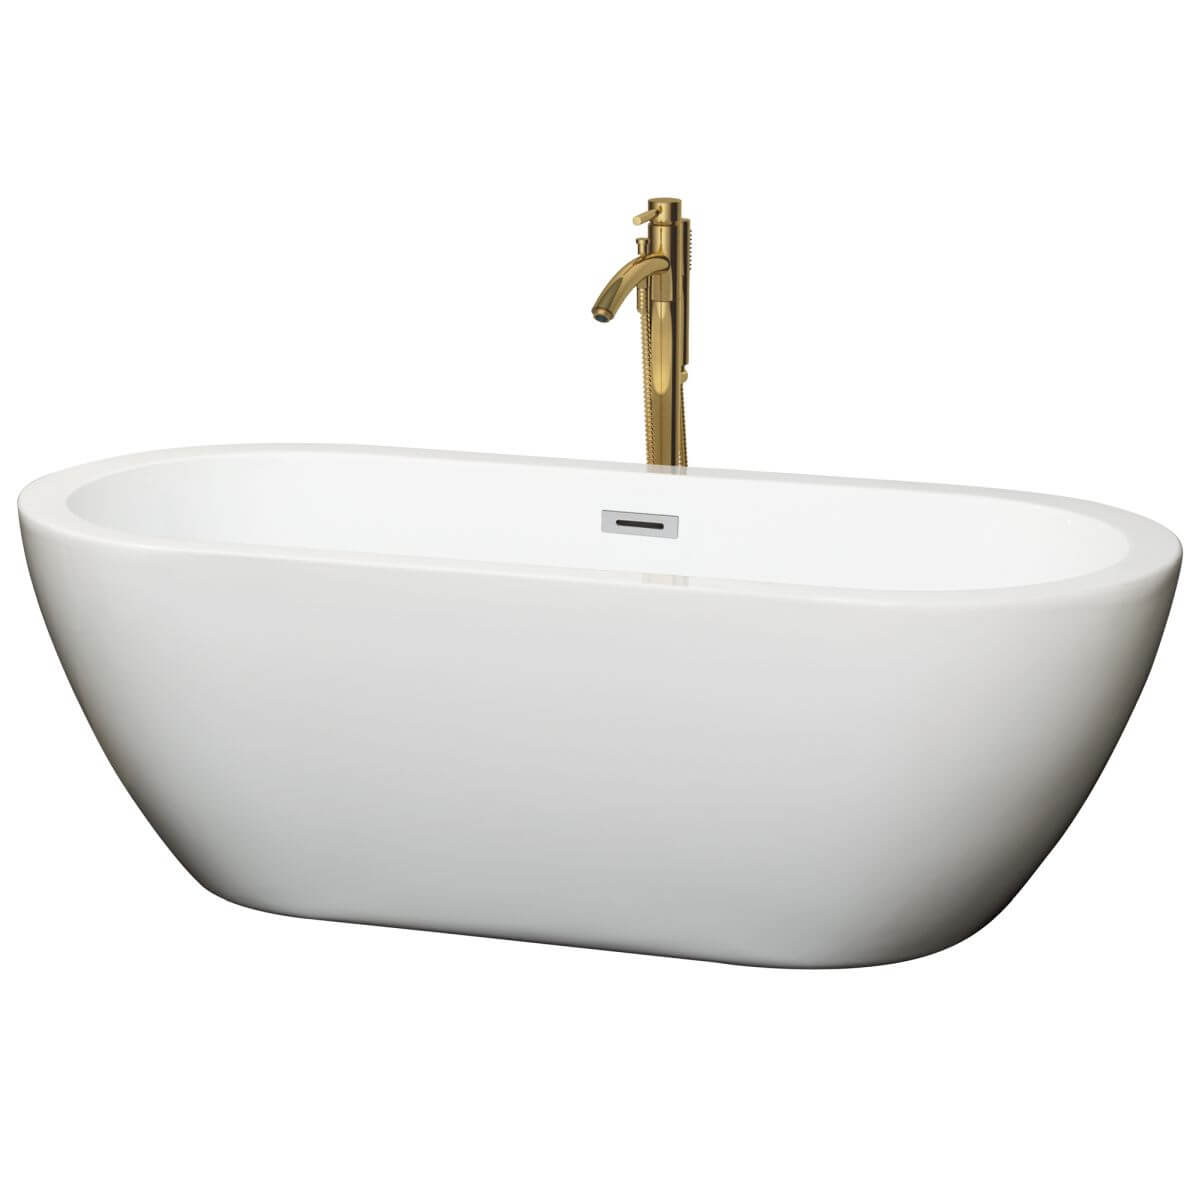 Wyndham Collection Soho 68 inch Freestanding Bathtub in White with Polished Chrome Trim and Floor Mounted Faucet in Brushed Gold - WCOBT100268PCATPGD